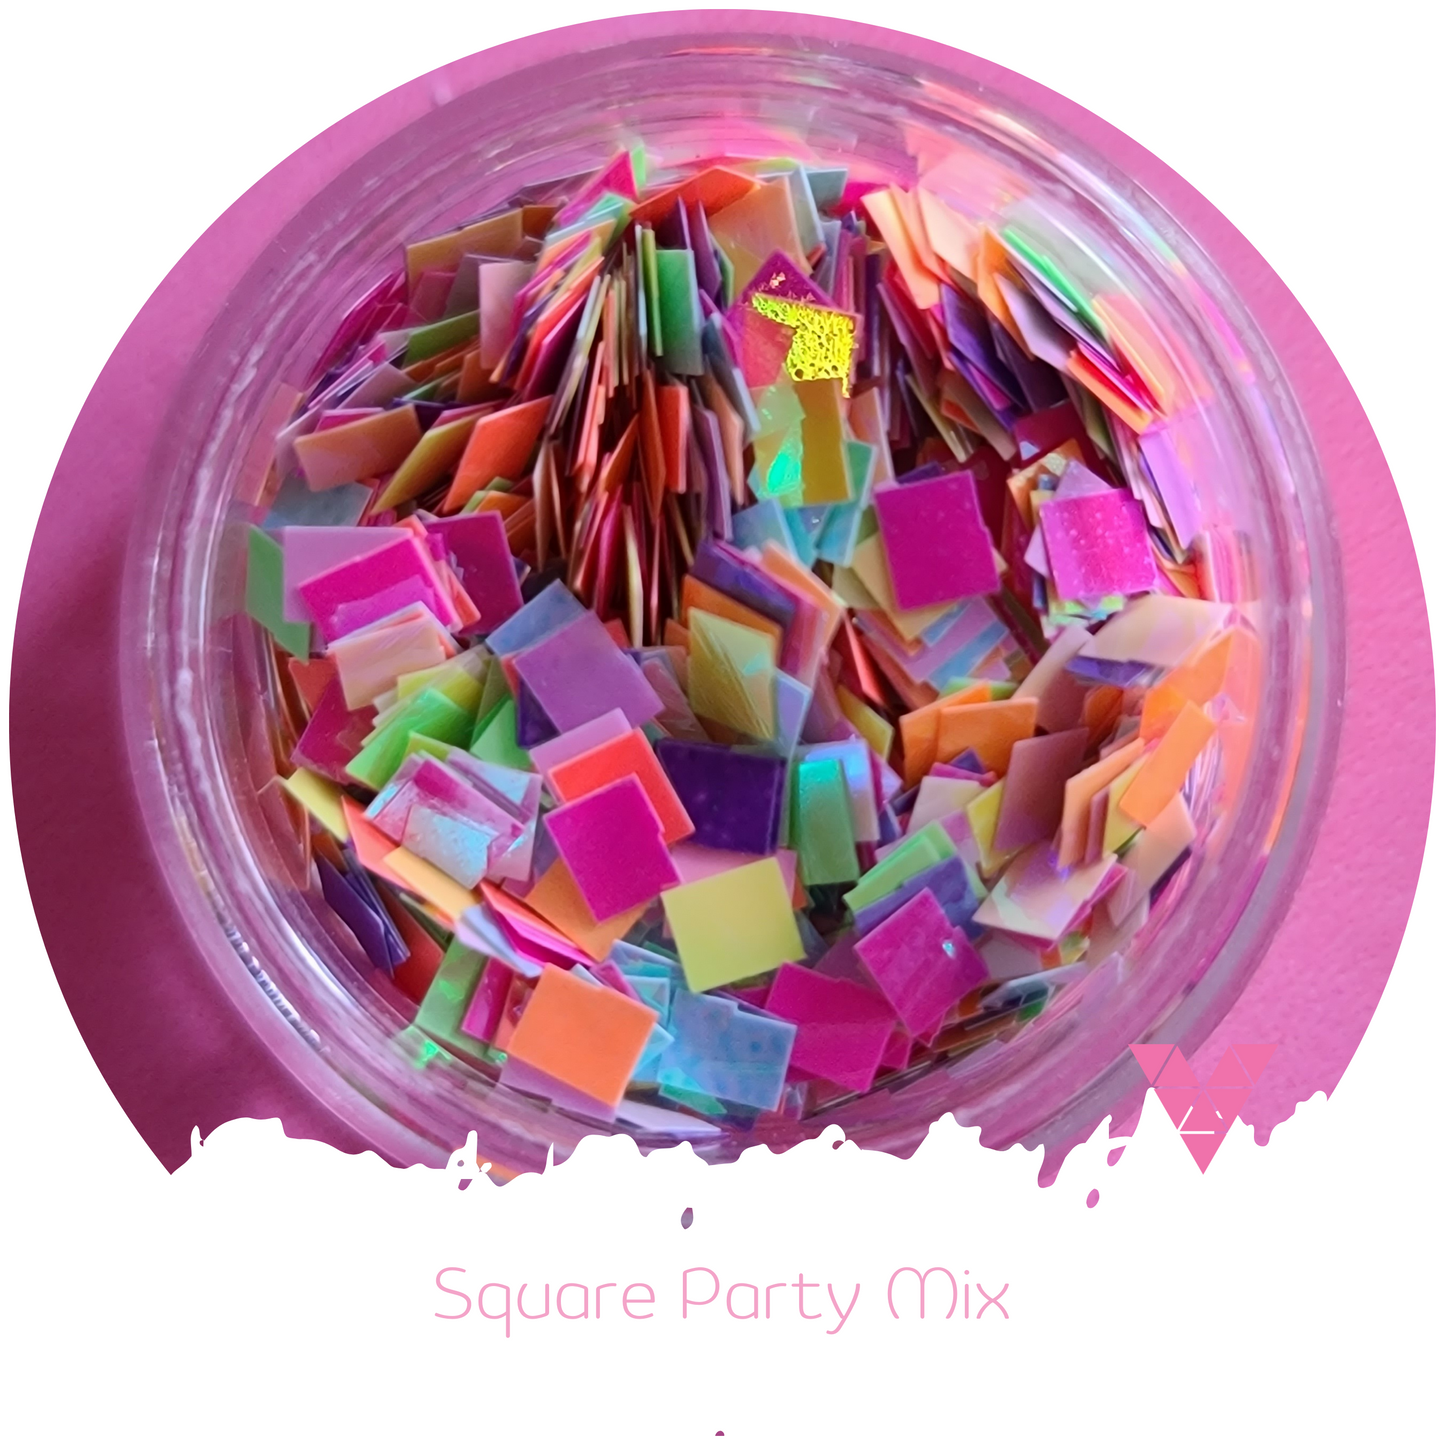 Square Party Mix